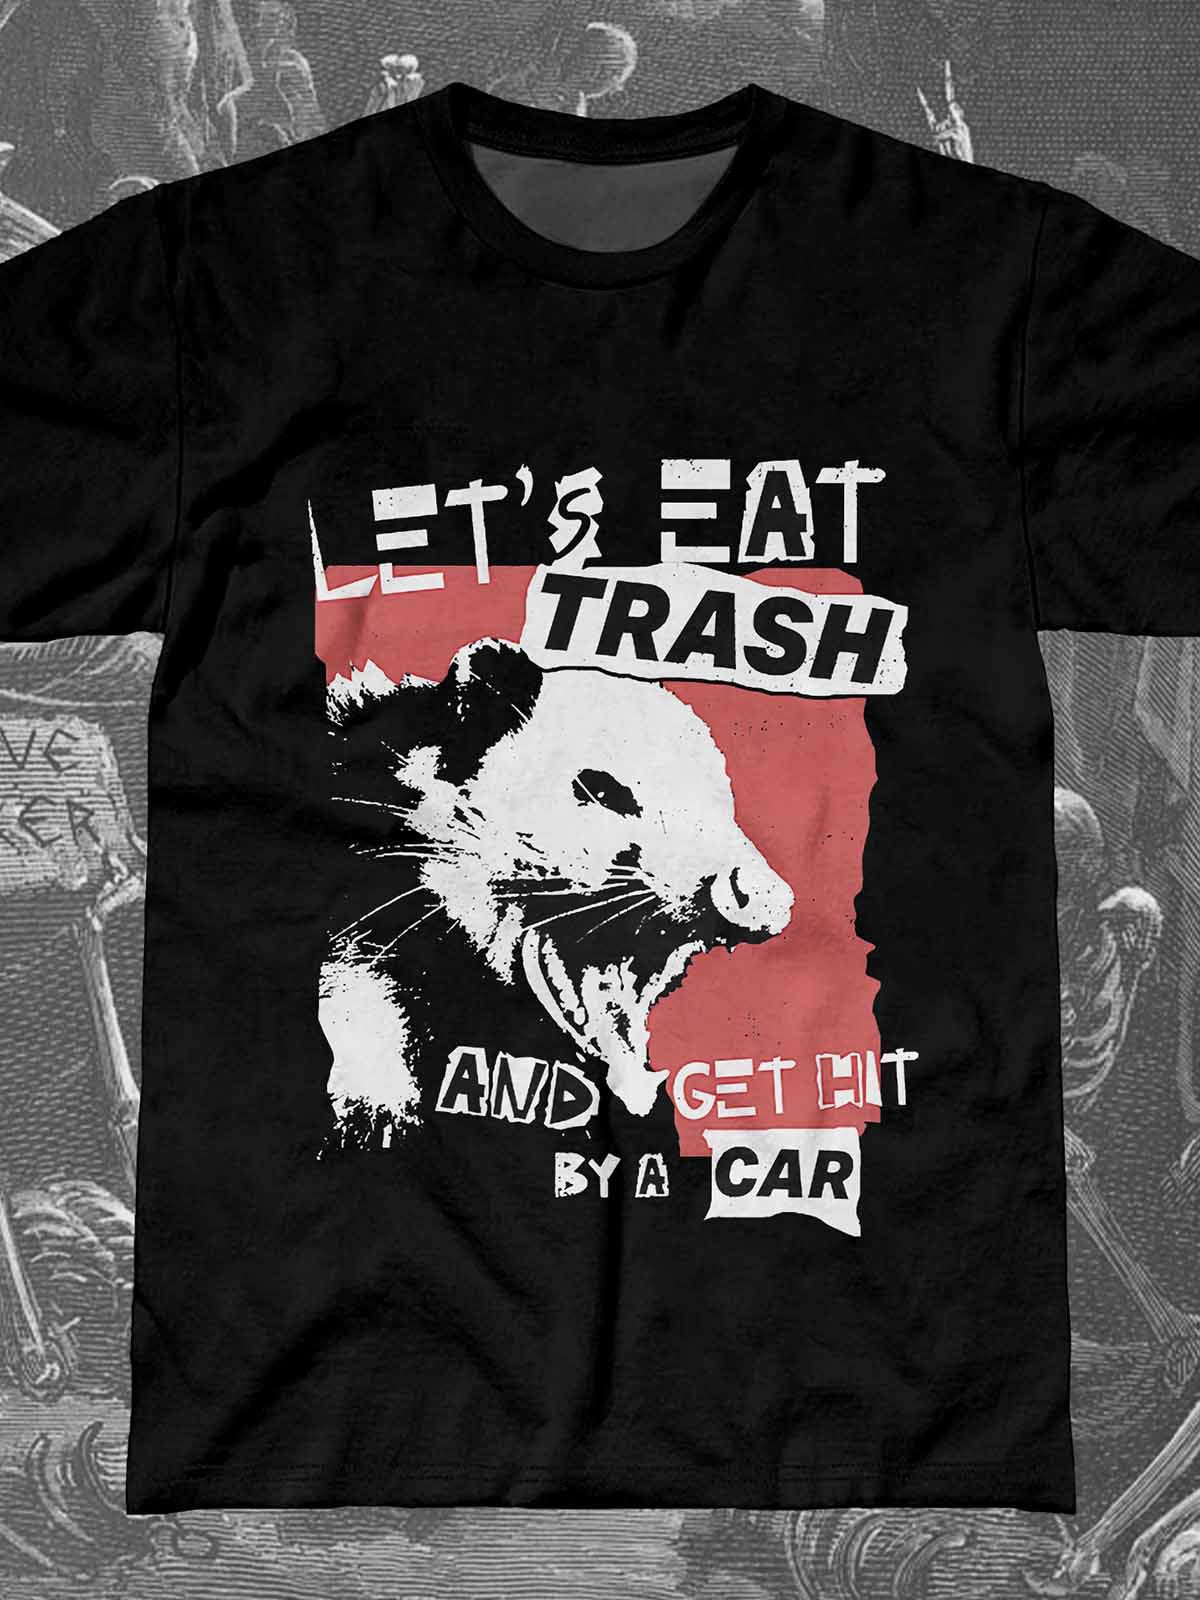 Lets Eat Trash And Get Hit By A Car Animal Round Neck Short Sleeve Men's T-shirt